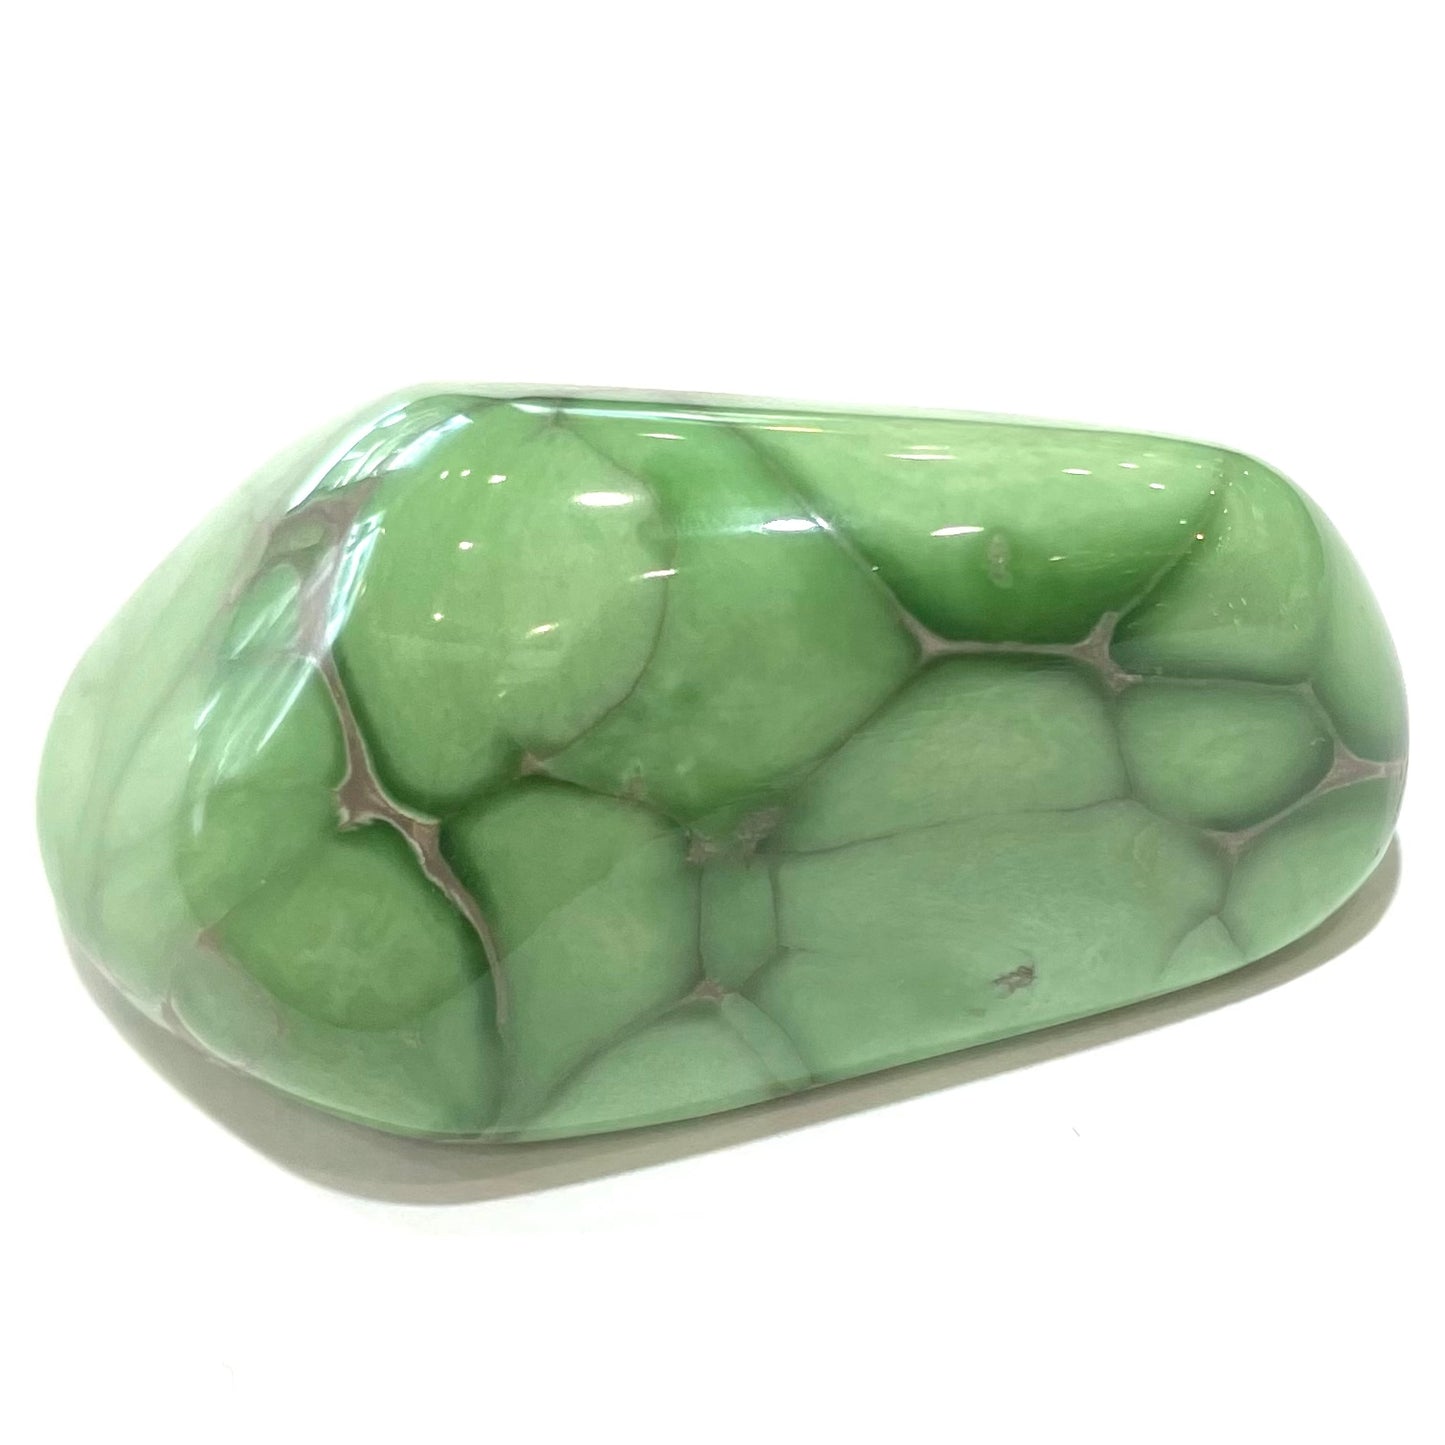 A large, polished variscite stone from Utah.